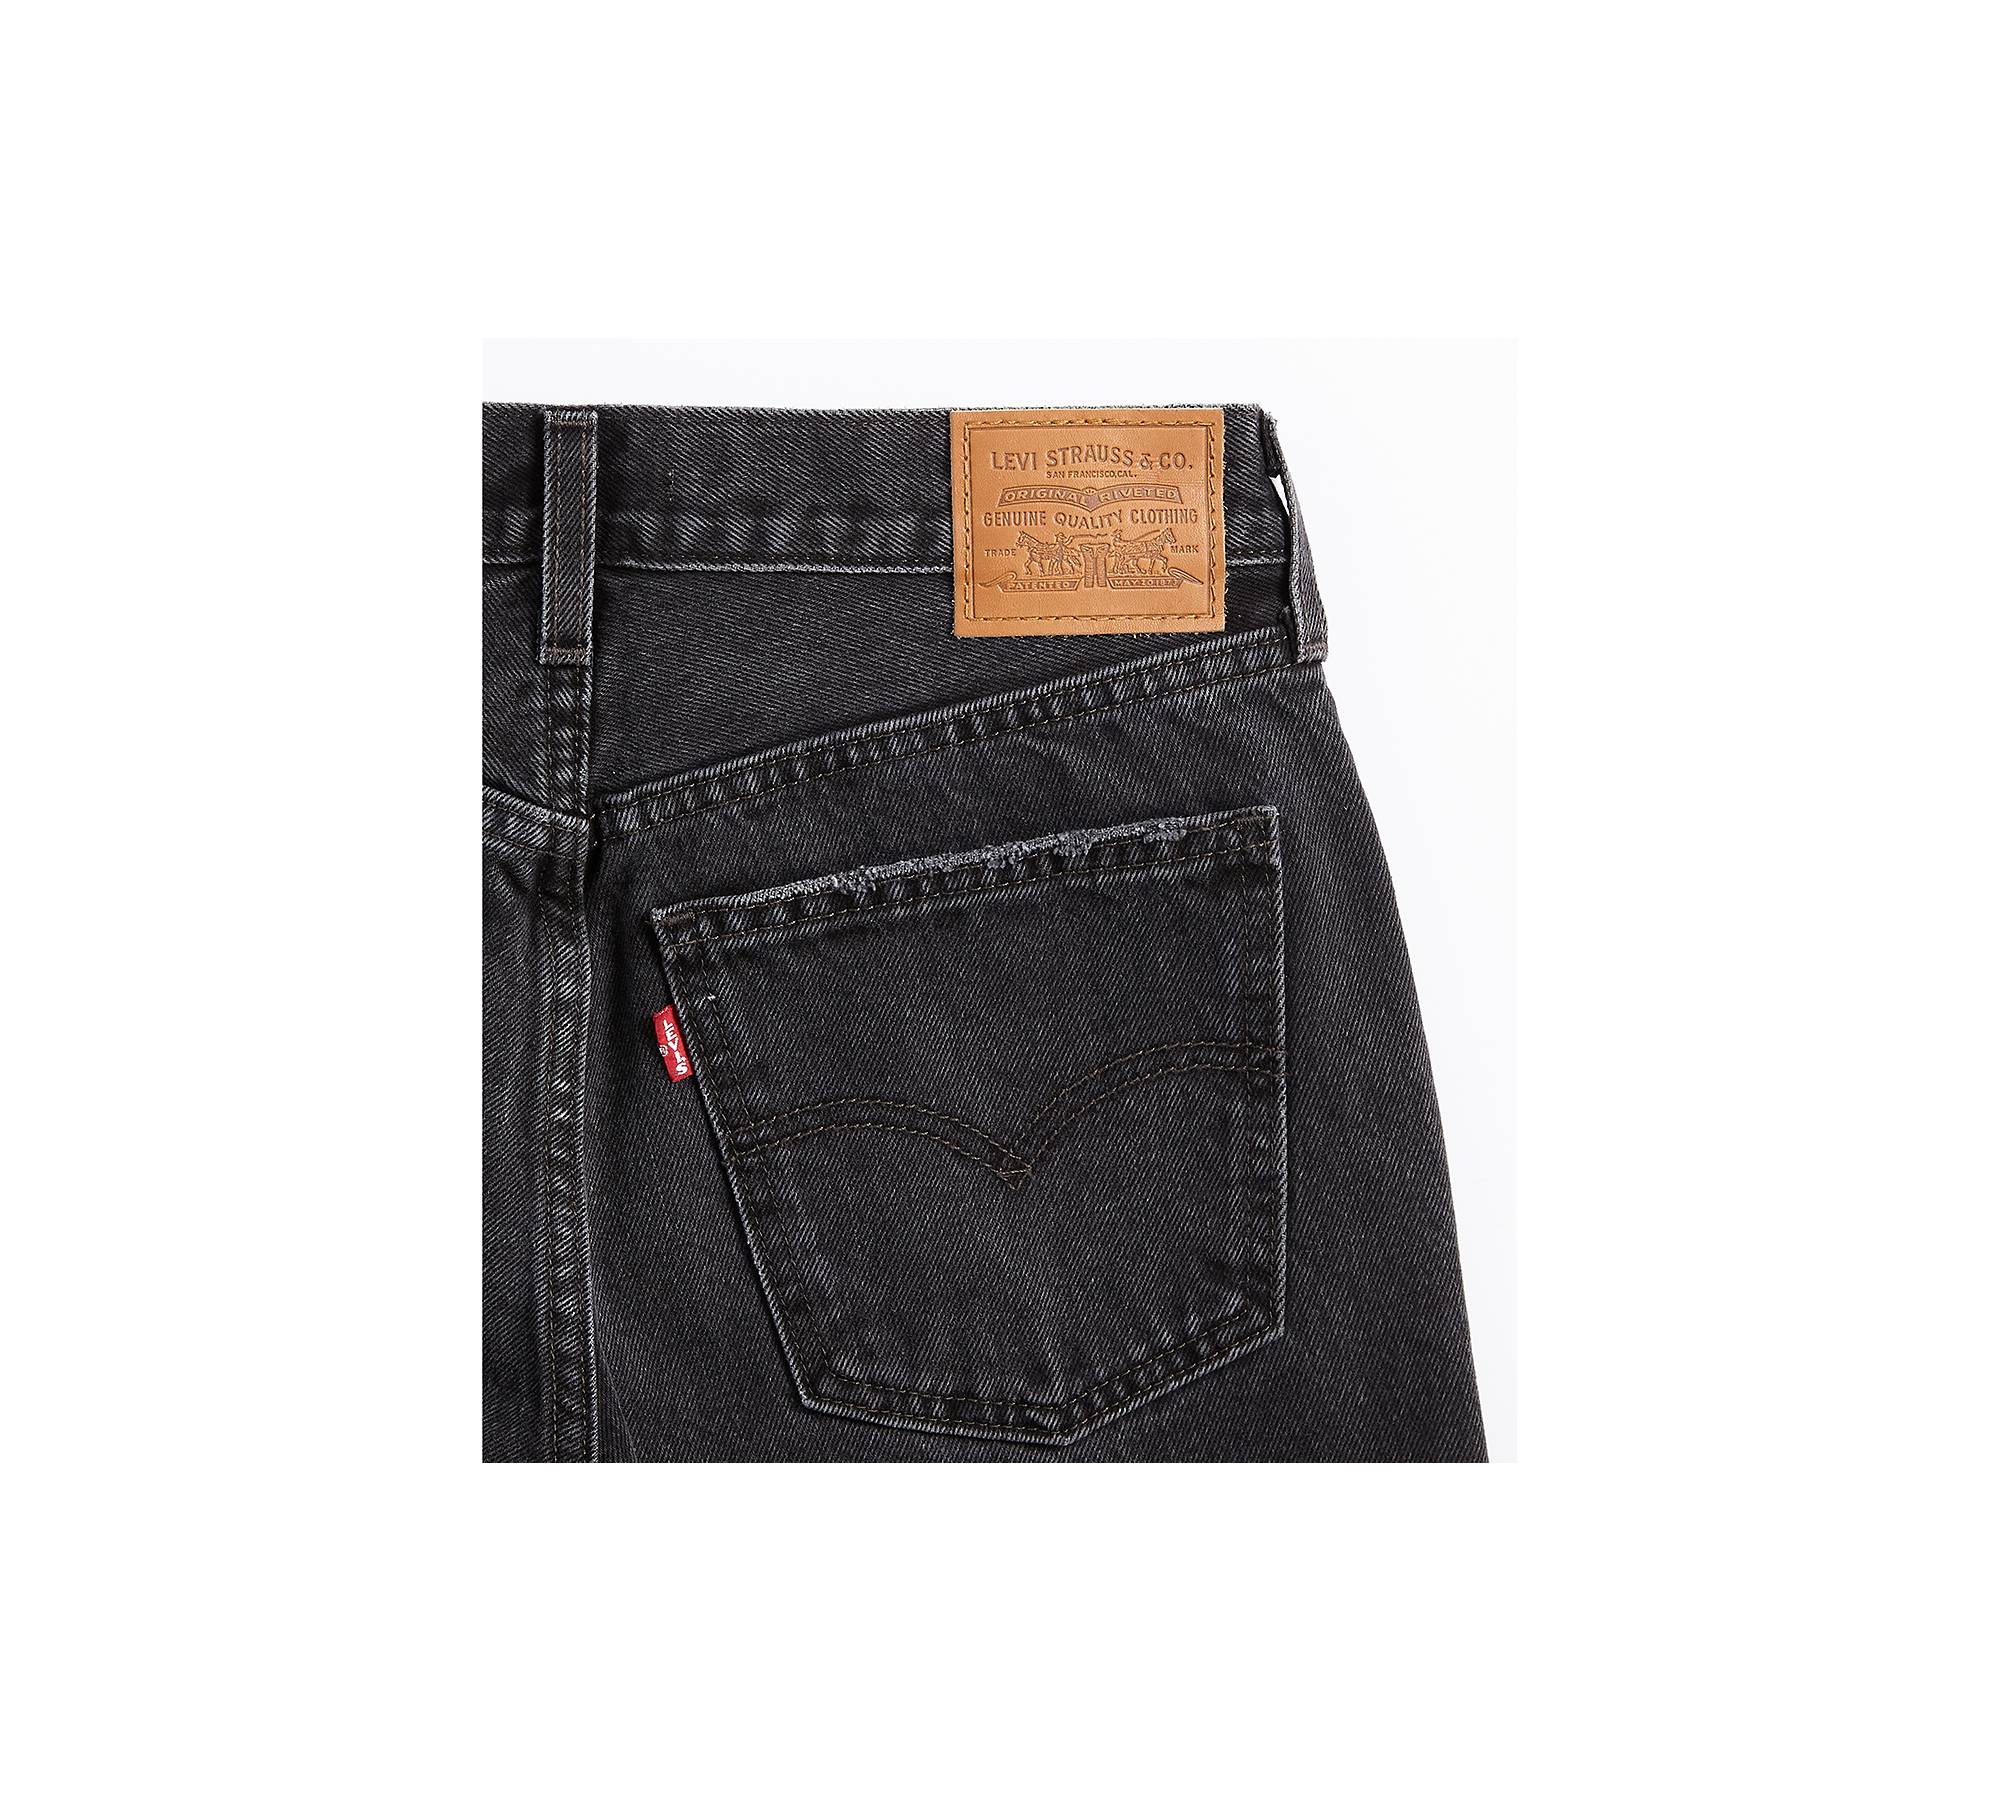 Middy Ankle Bootcut Women's Jeans - Black | Levi's® US